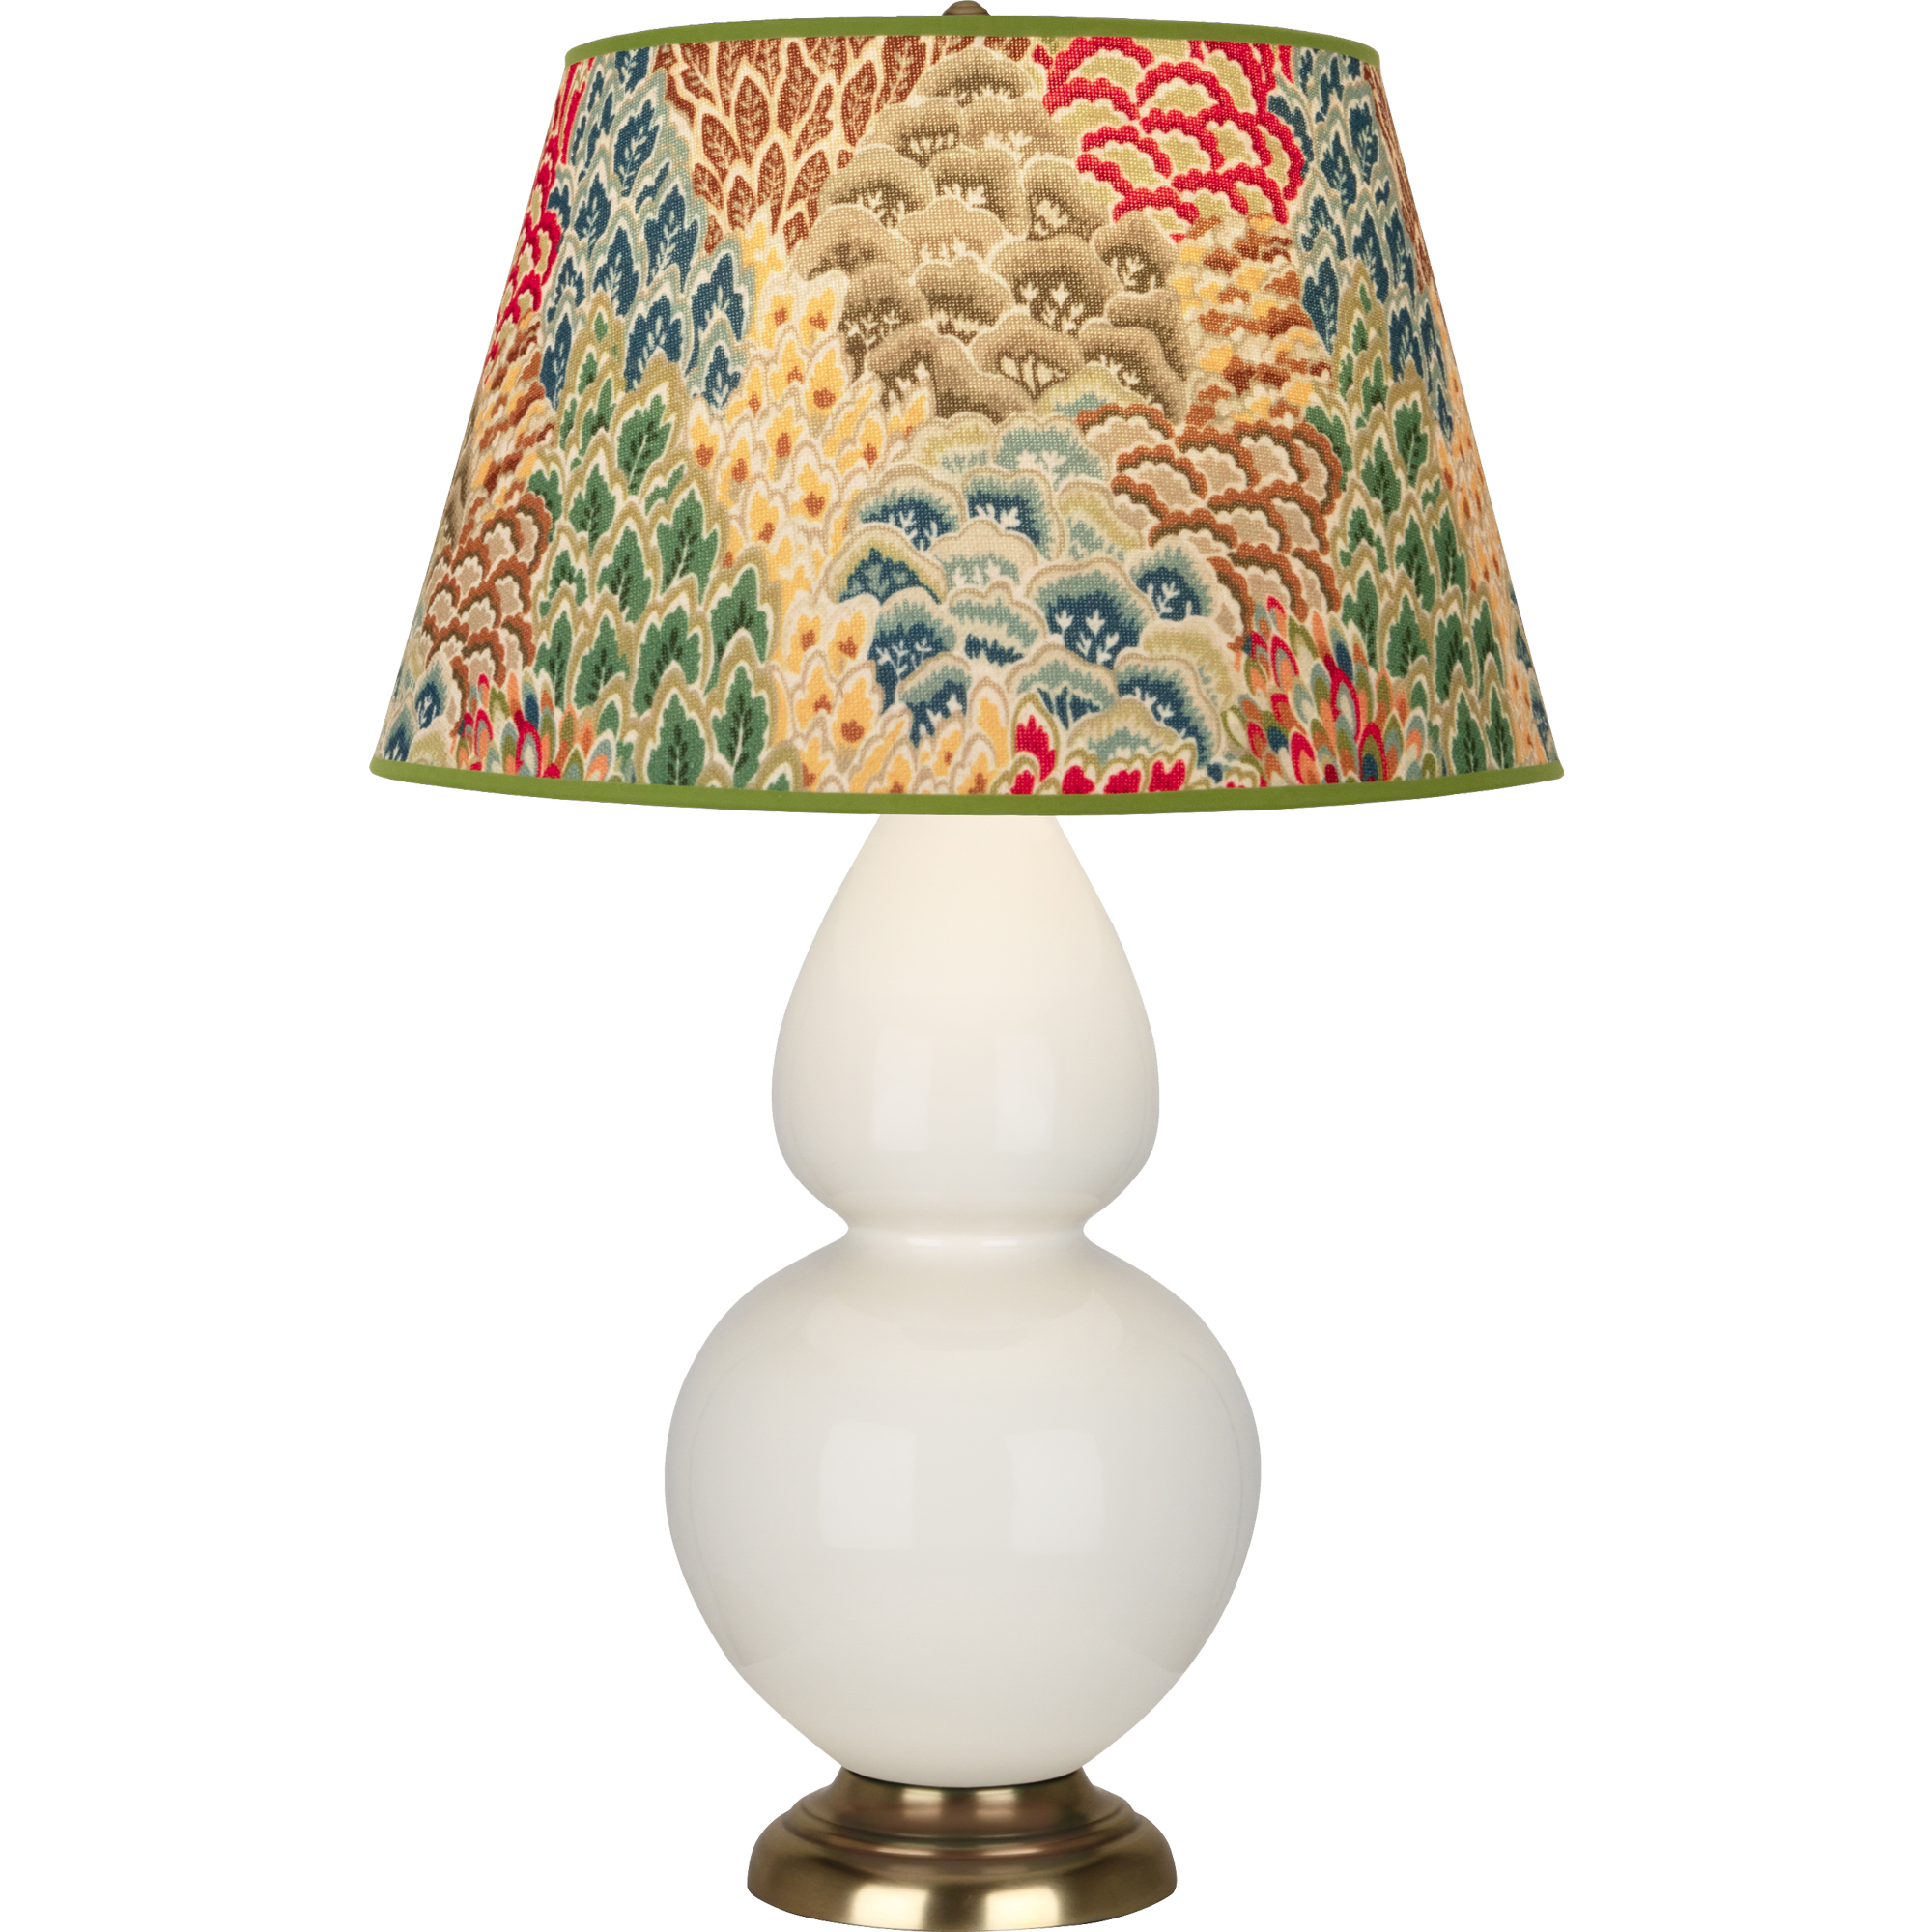 Double Gourd Table Lamp Style #1754F